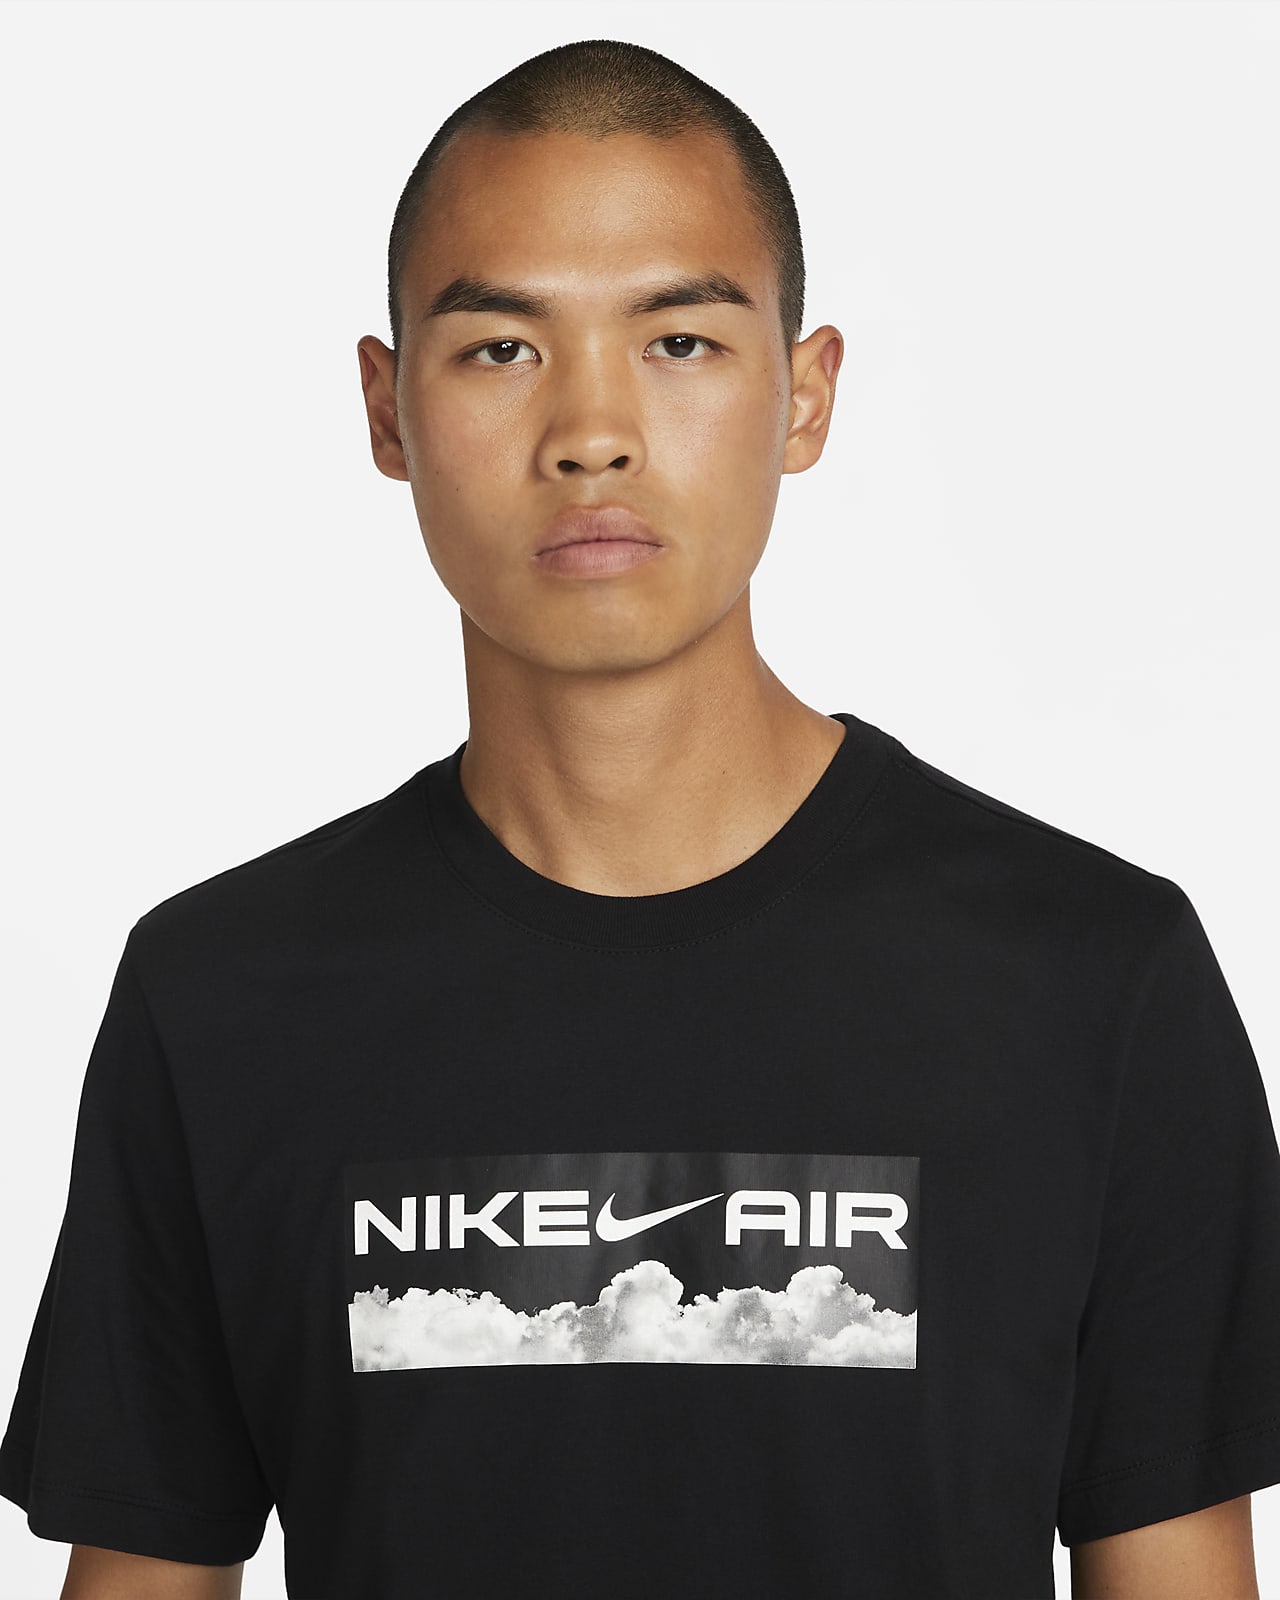 what is nike air clothing